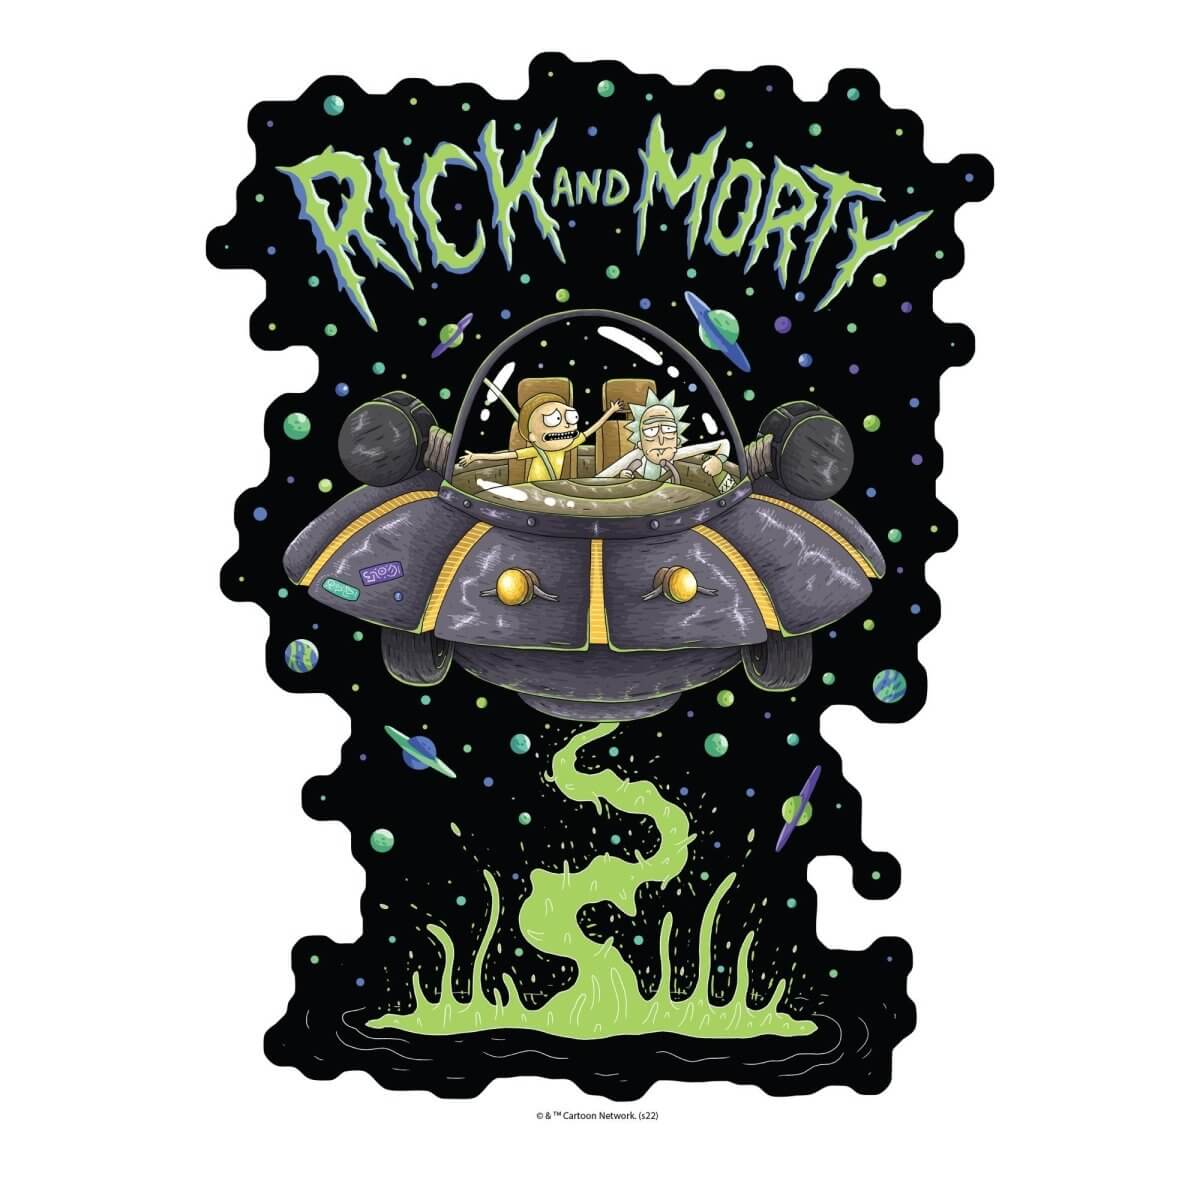 Kismet Decals Rick & Morty Psychedelic Monsters 6 Licensed Wall Sticker - Easy DIY Home & Kids Room Decor Wall Decal Art - Kismet Decals